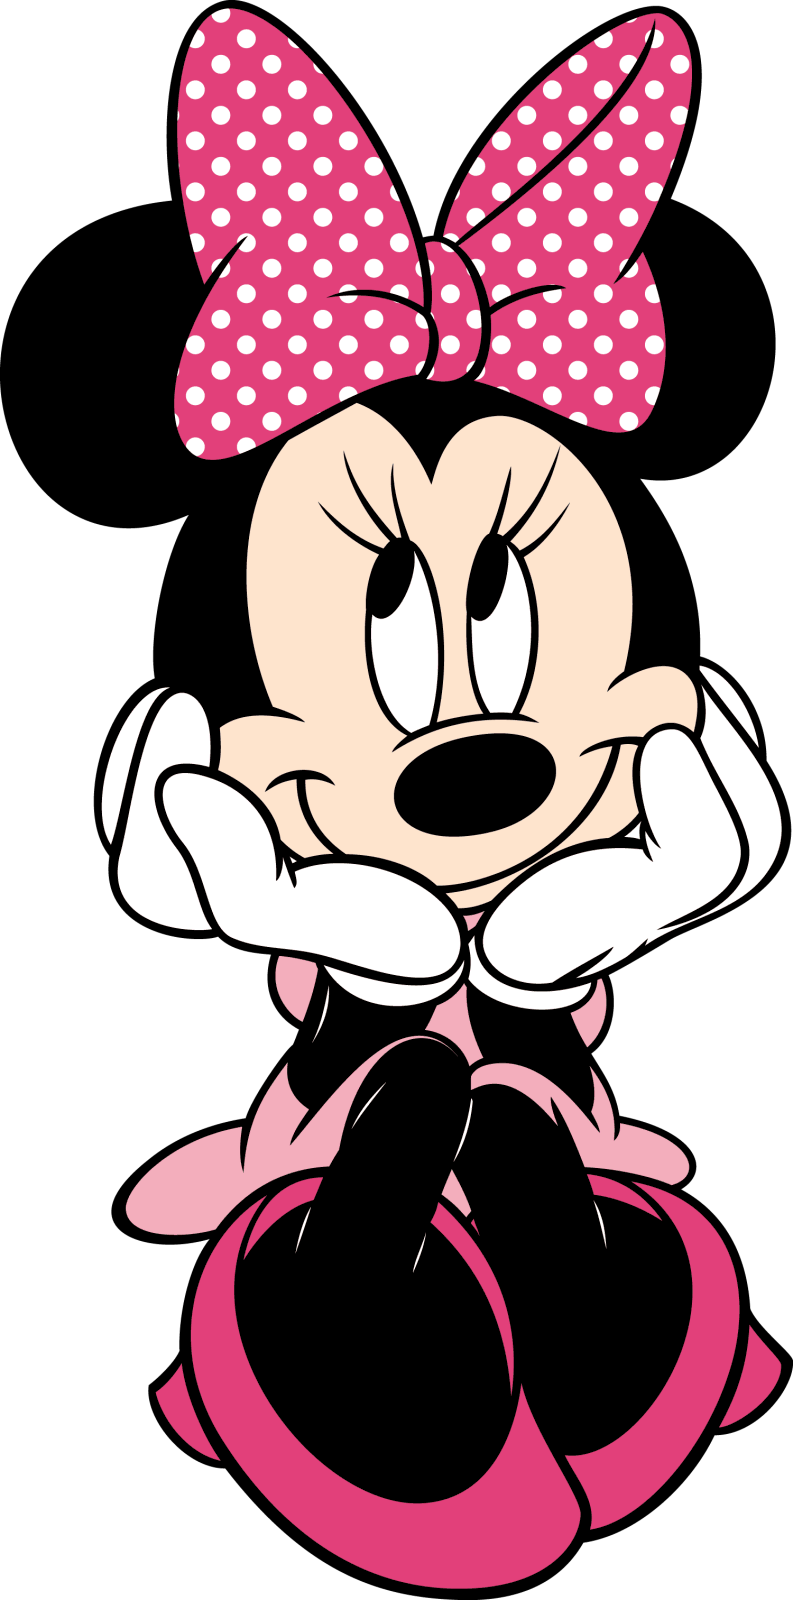 Clipart halloween minnie mouse. Pin by shelly rowell